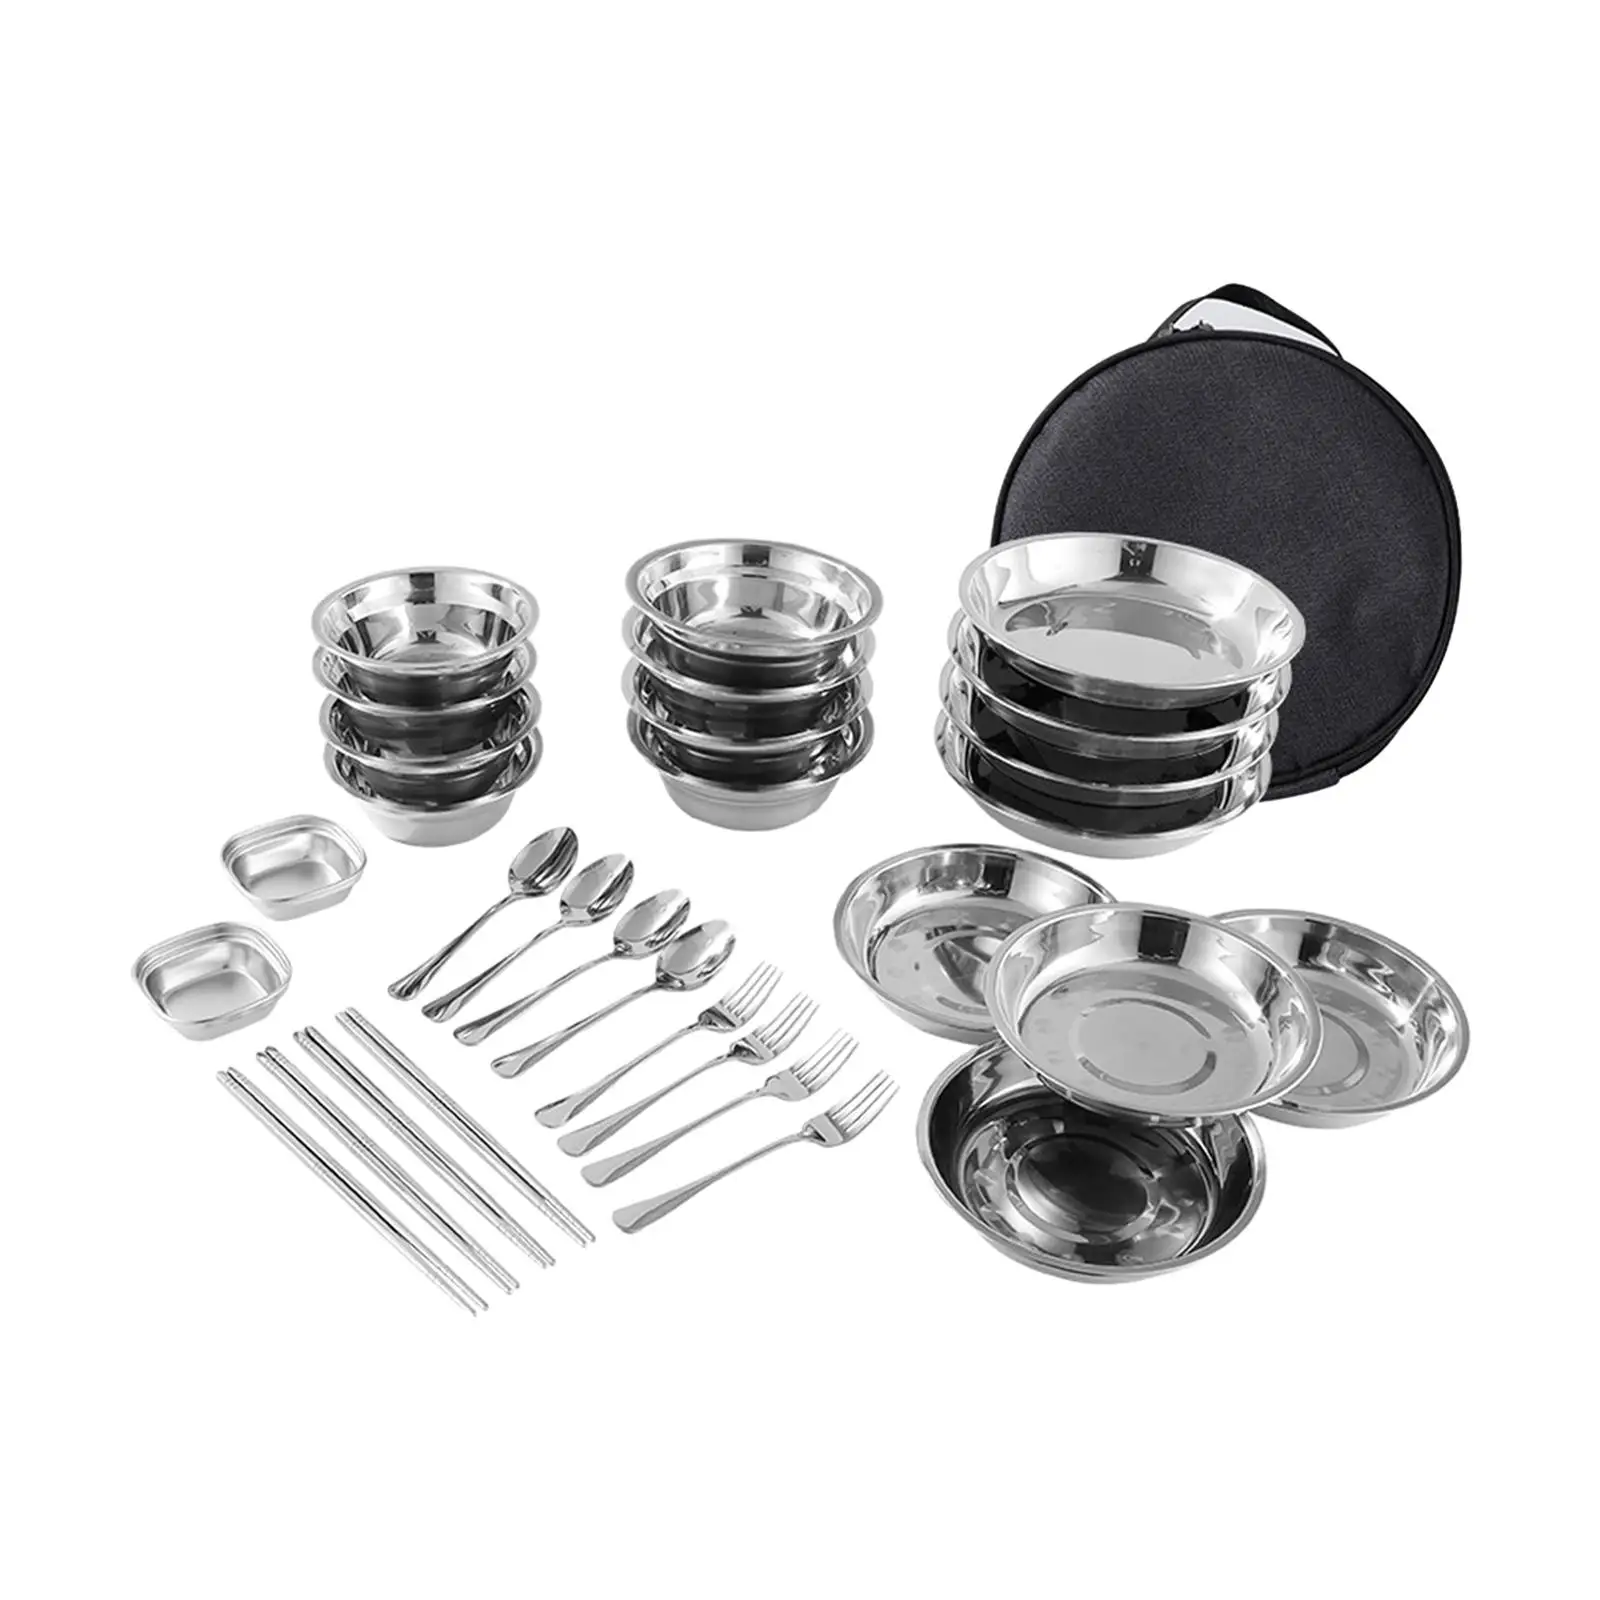 Stainless Steel Plates and Bowls Camping Set Camping Utensils Set Dishes Camping Cutlery Set for Travel BBQ Beach Backpacking